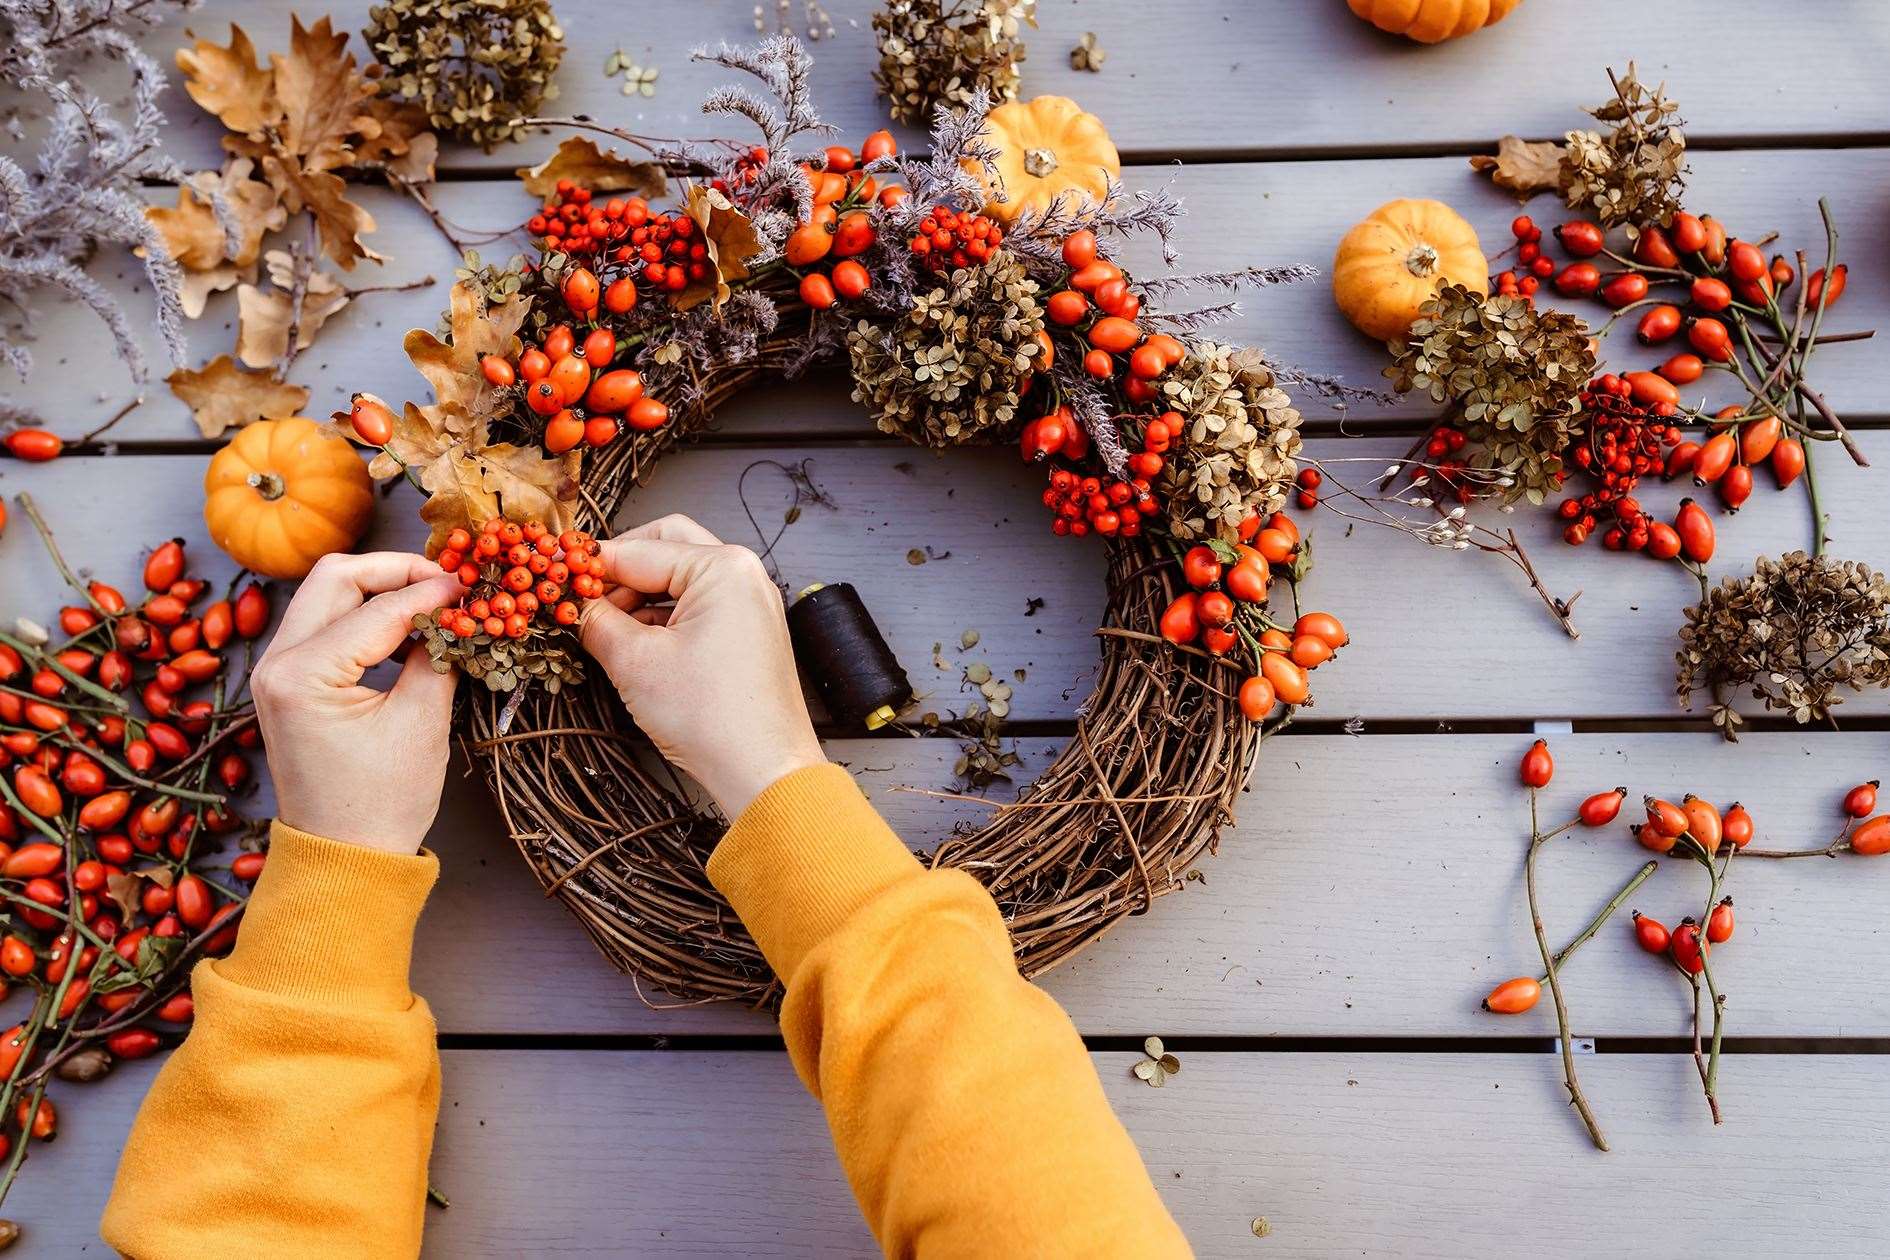 Making autumn wreaths and other seasonal decorations.